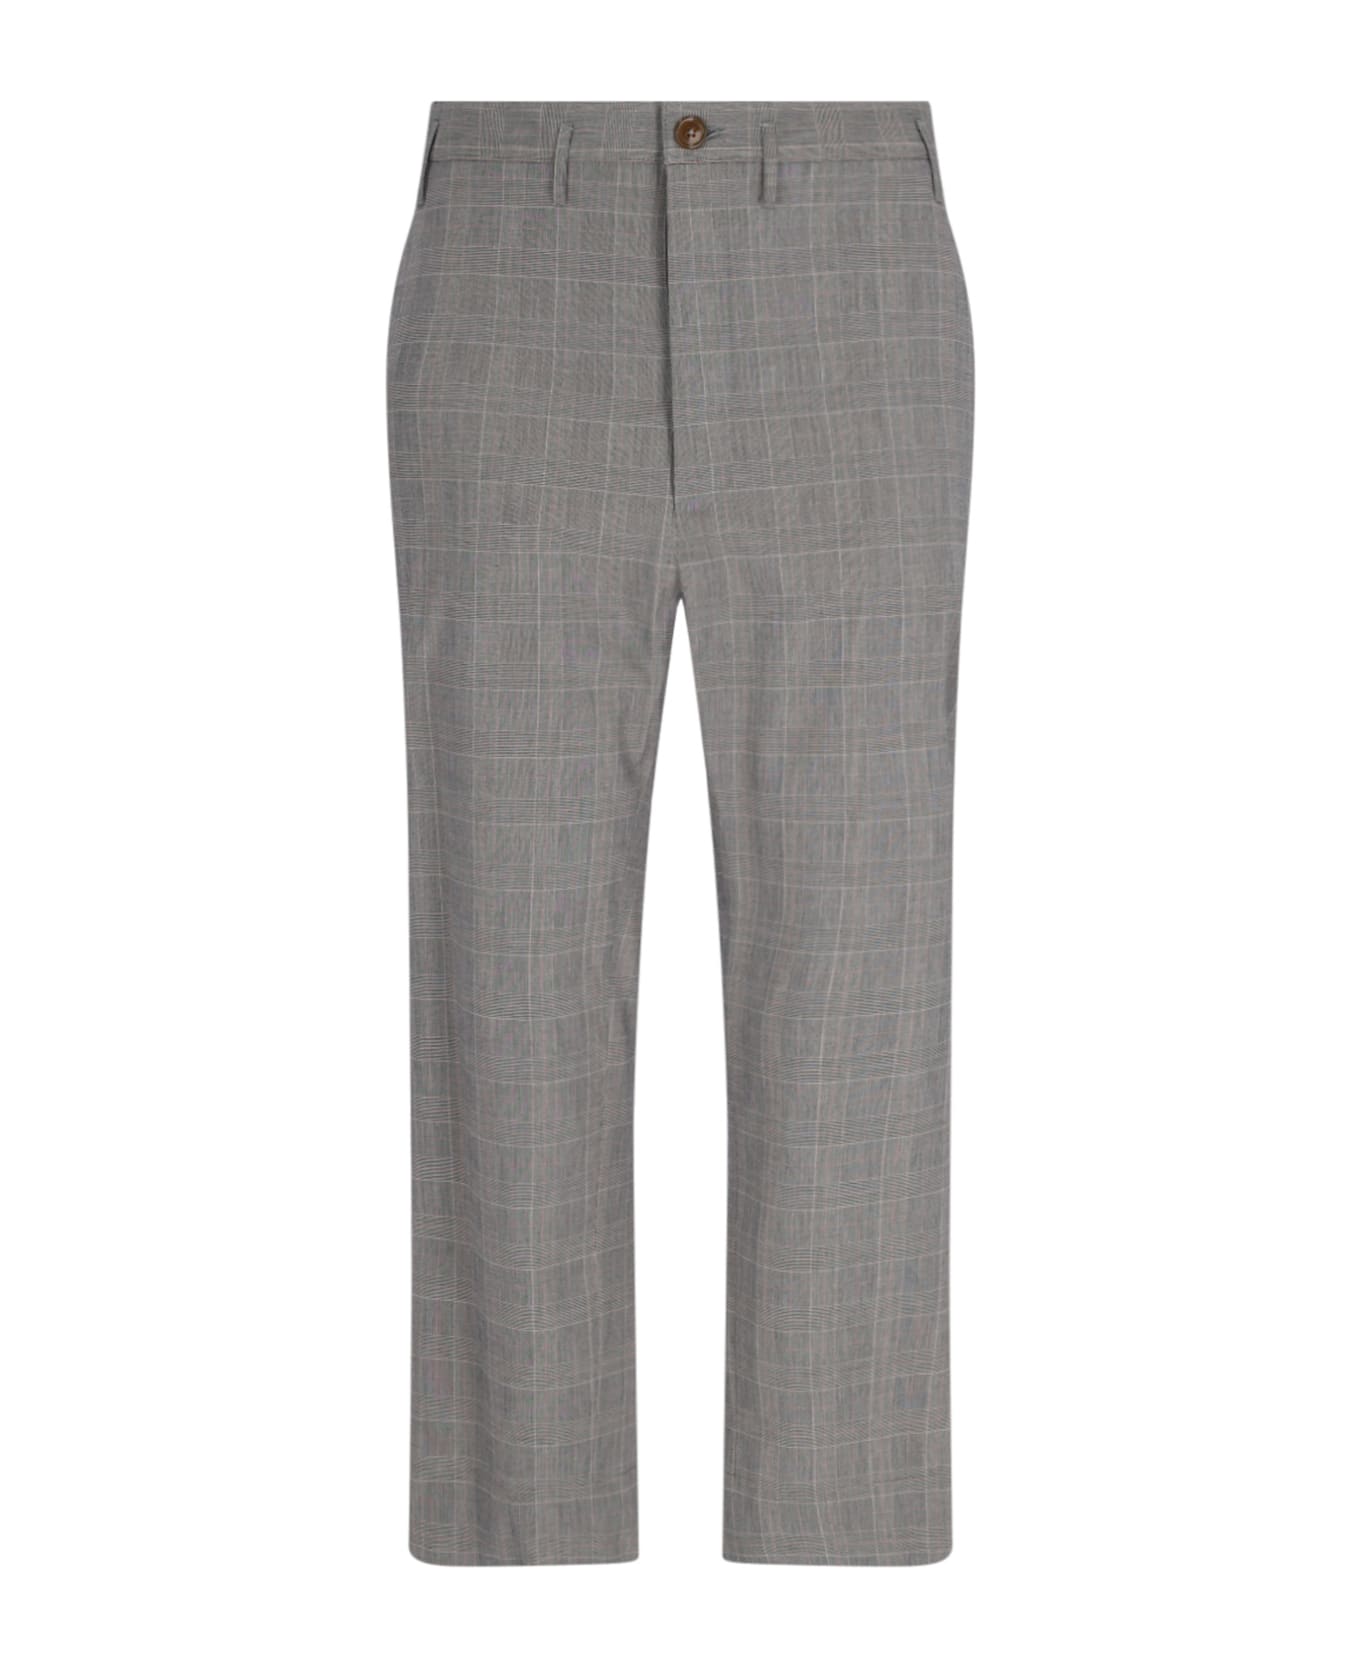 Vivienne Westwood Cropped Trousers - Gray